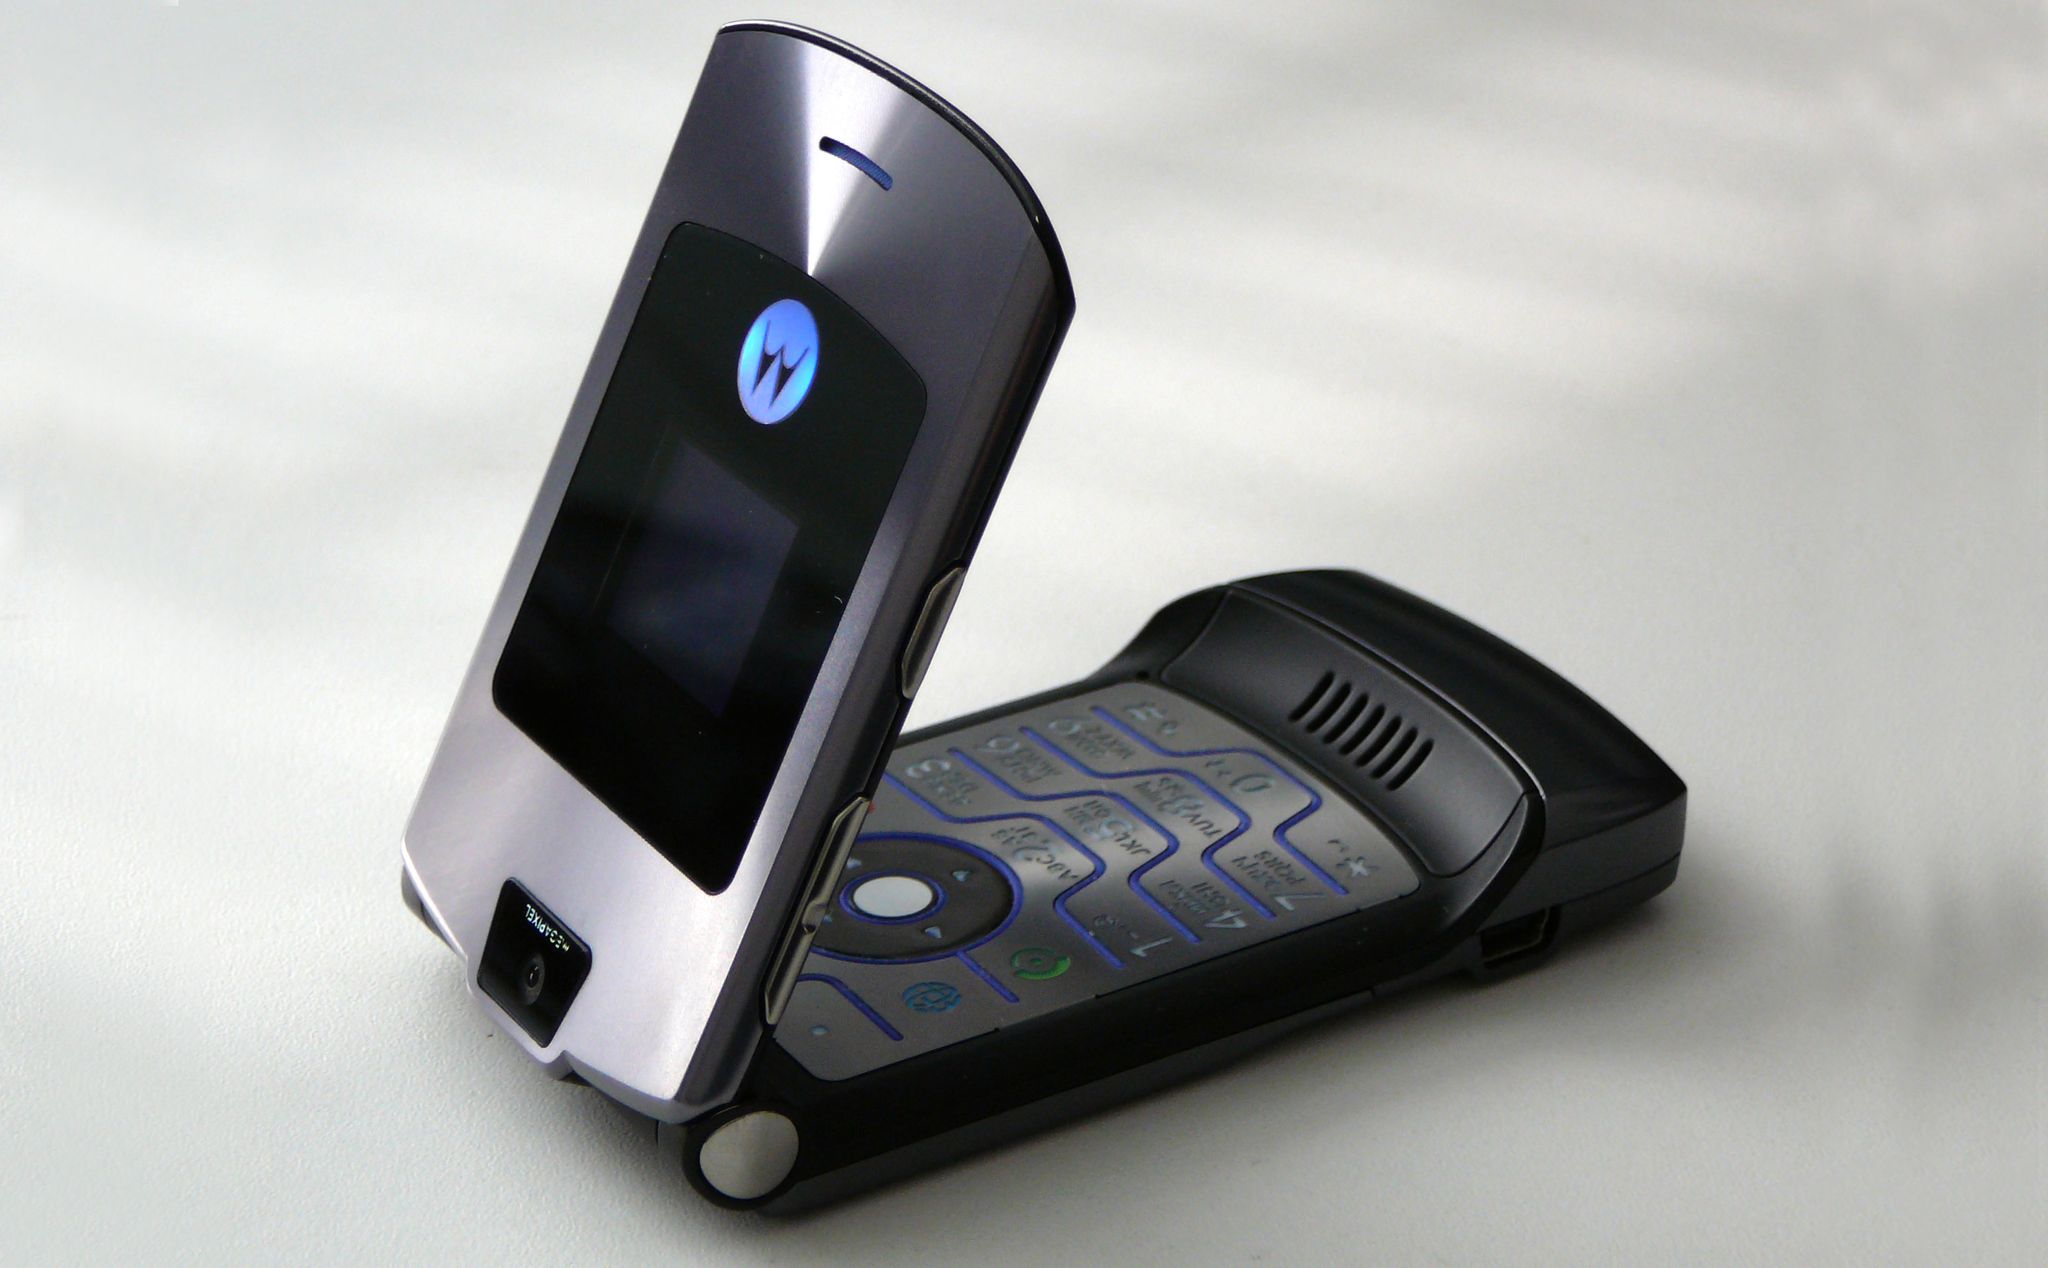 The Motorola Razr is rumoured to be making a comeback for 2019 as a  foldable smartphone